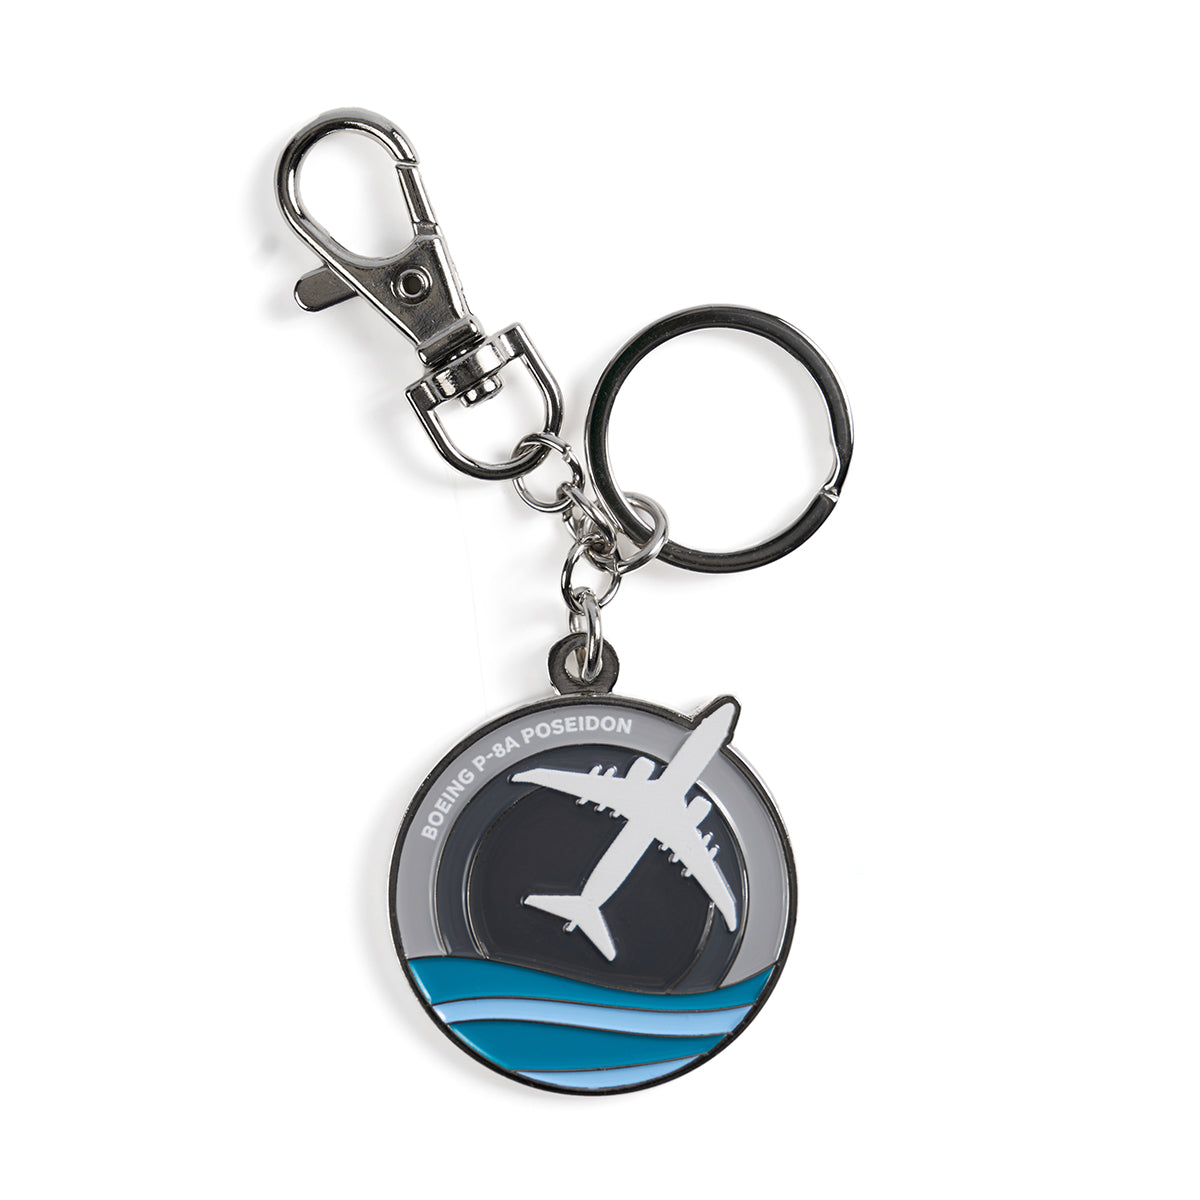 Skyward keychain, featuring the iconic Boeing P-8 Poseidon in a roundel design.